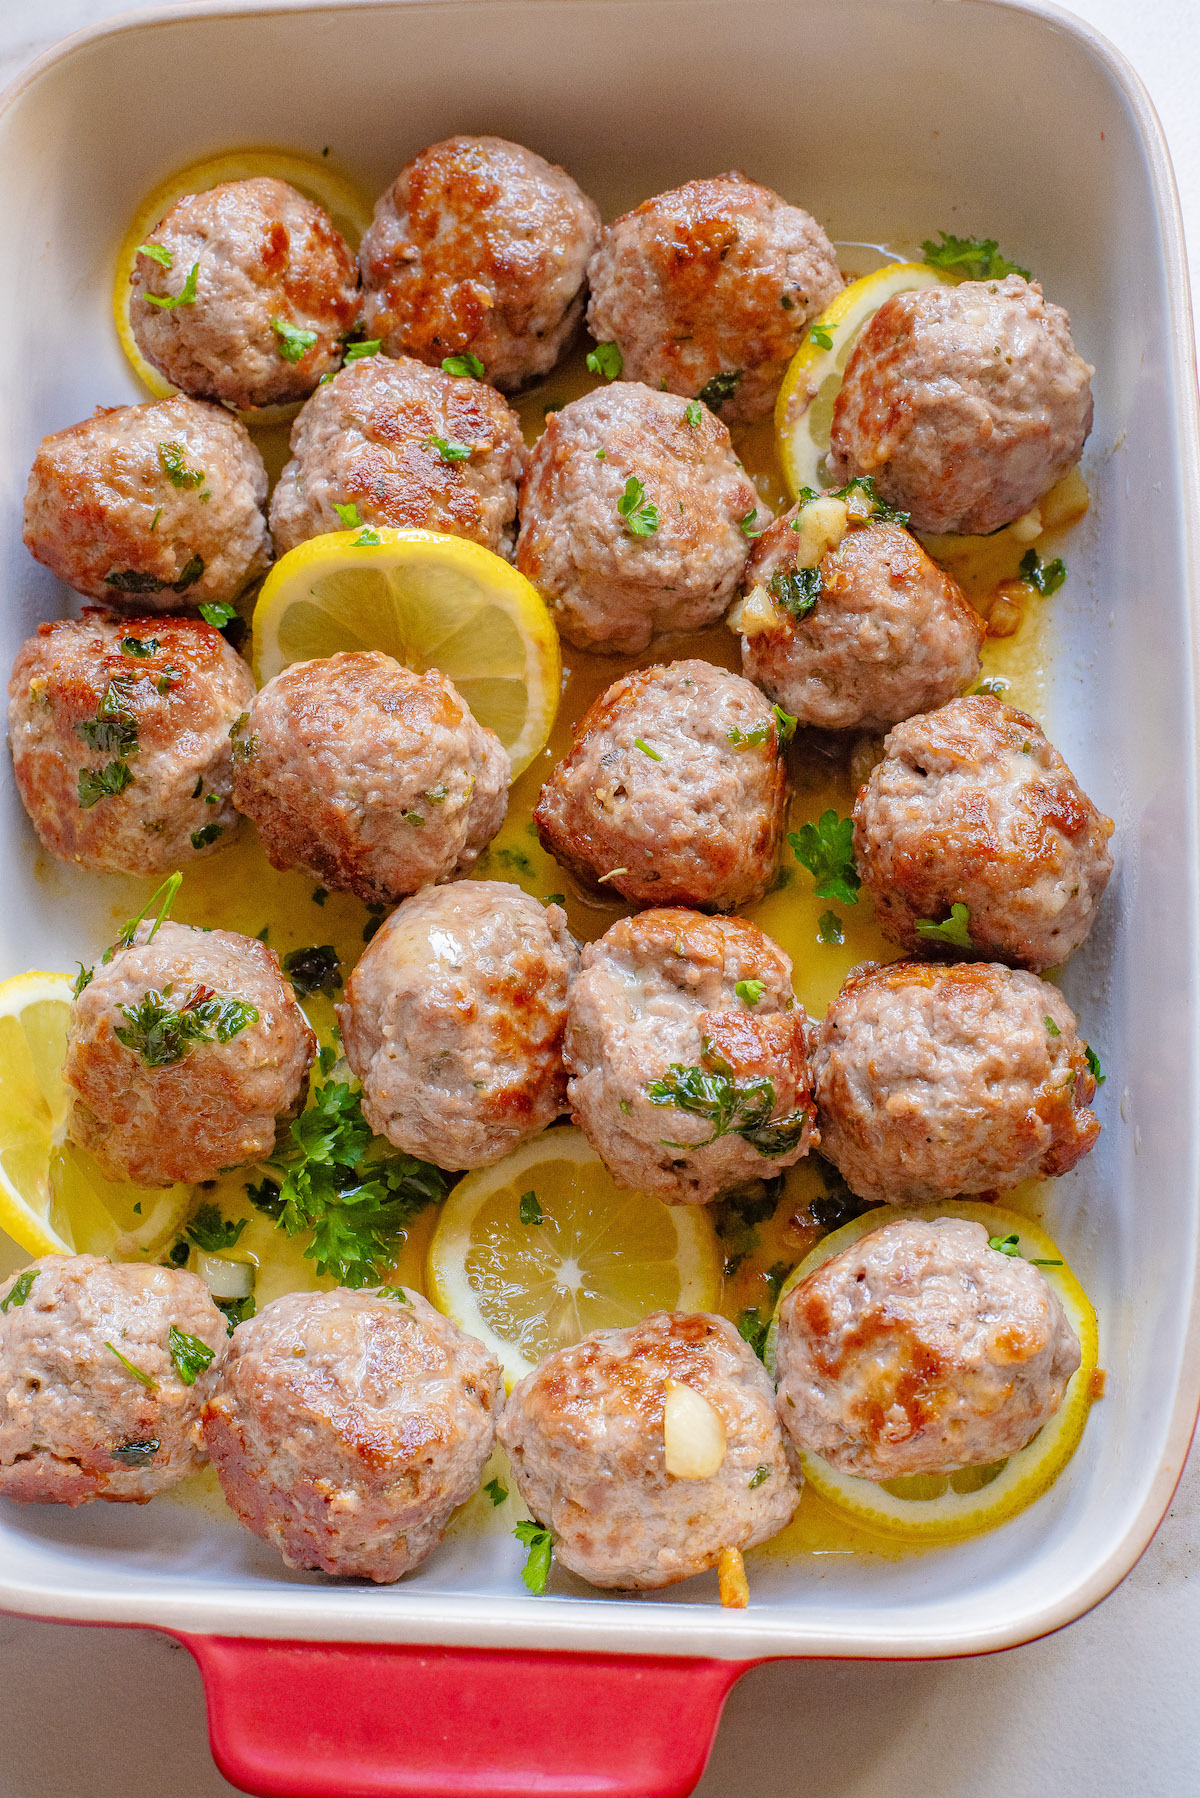 the baked turkey meatballs garnished with lemon and parsley